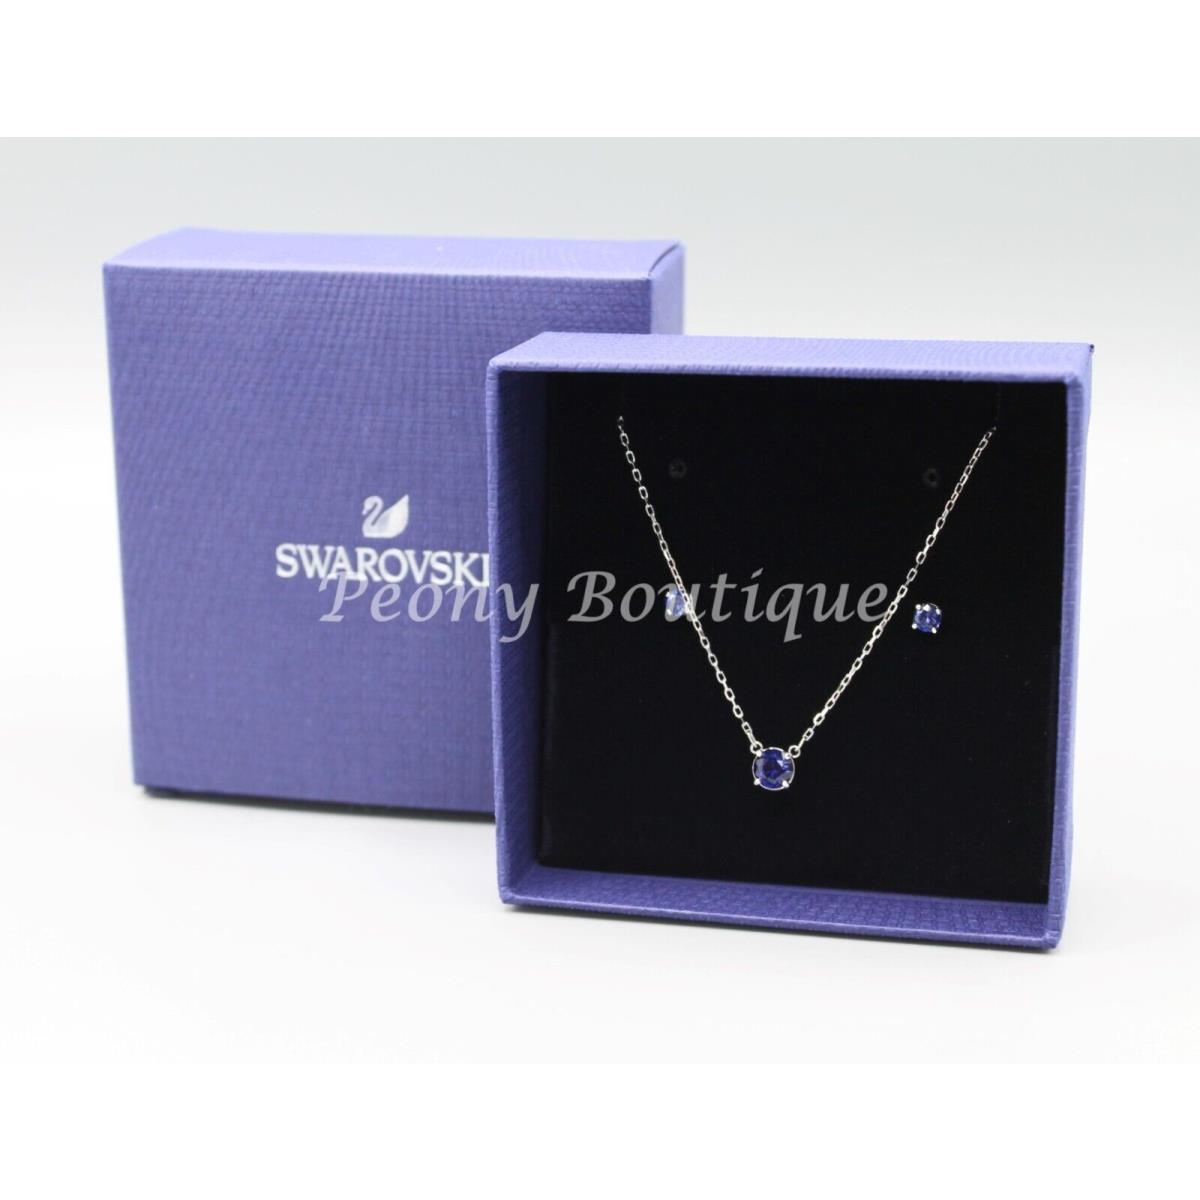 Swarovski 5536554 Attract Set Necklace Earrings Sapphire Blue White Gold Tone